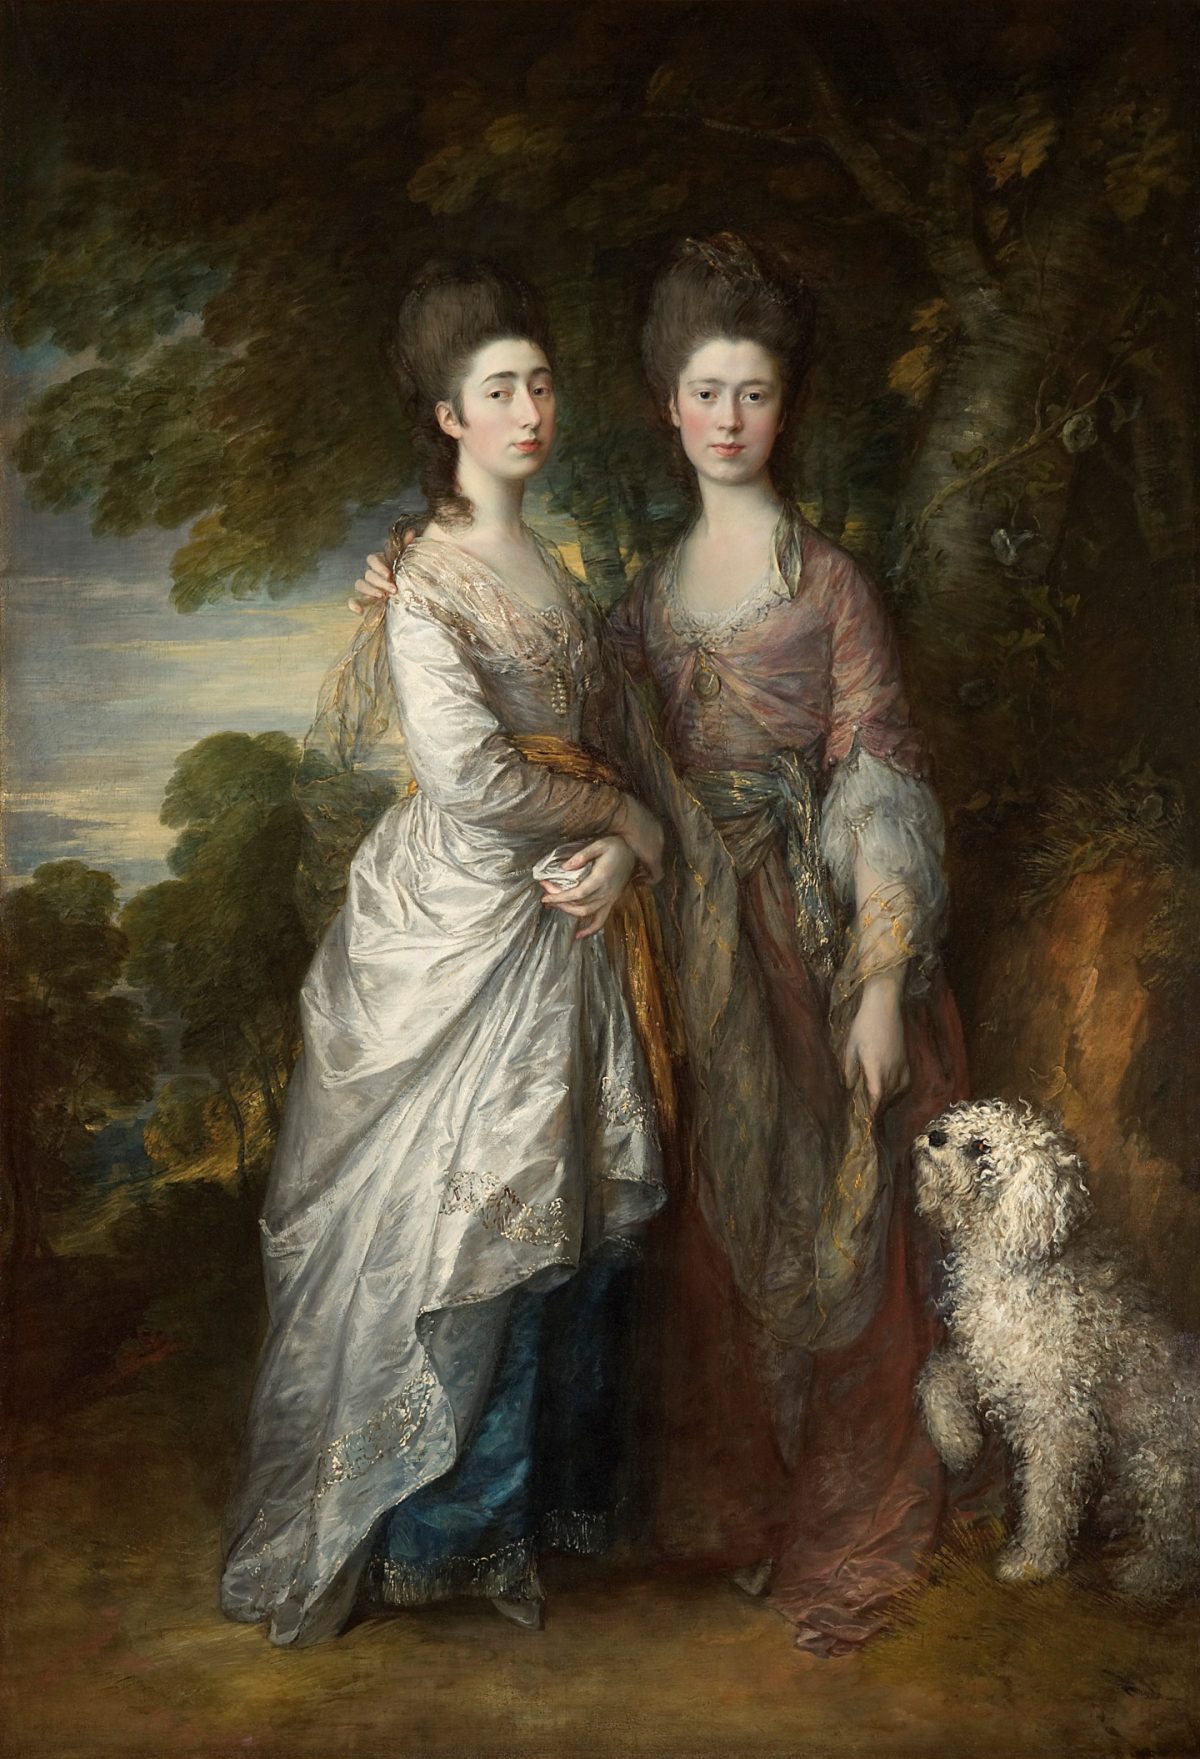 Two 18th century young women and a dog